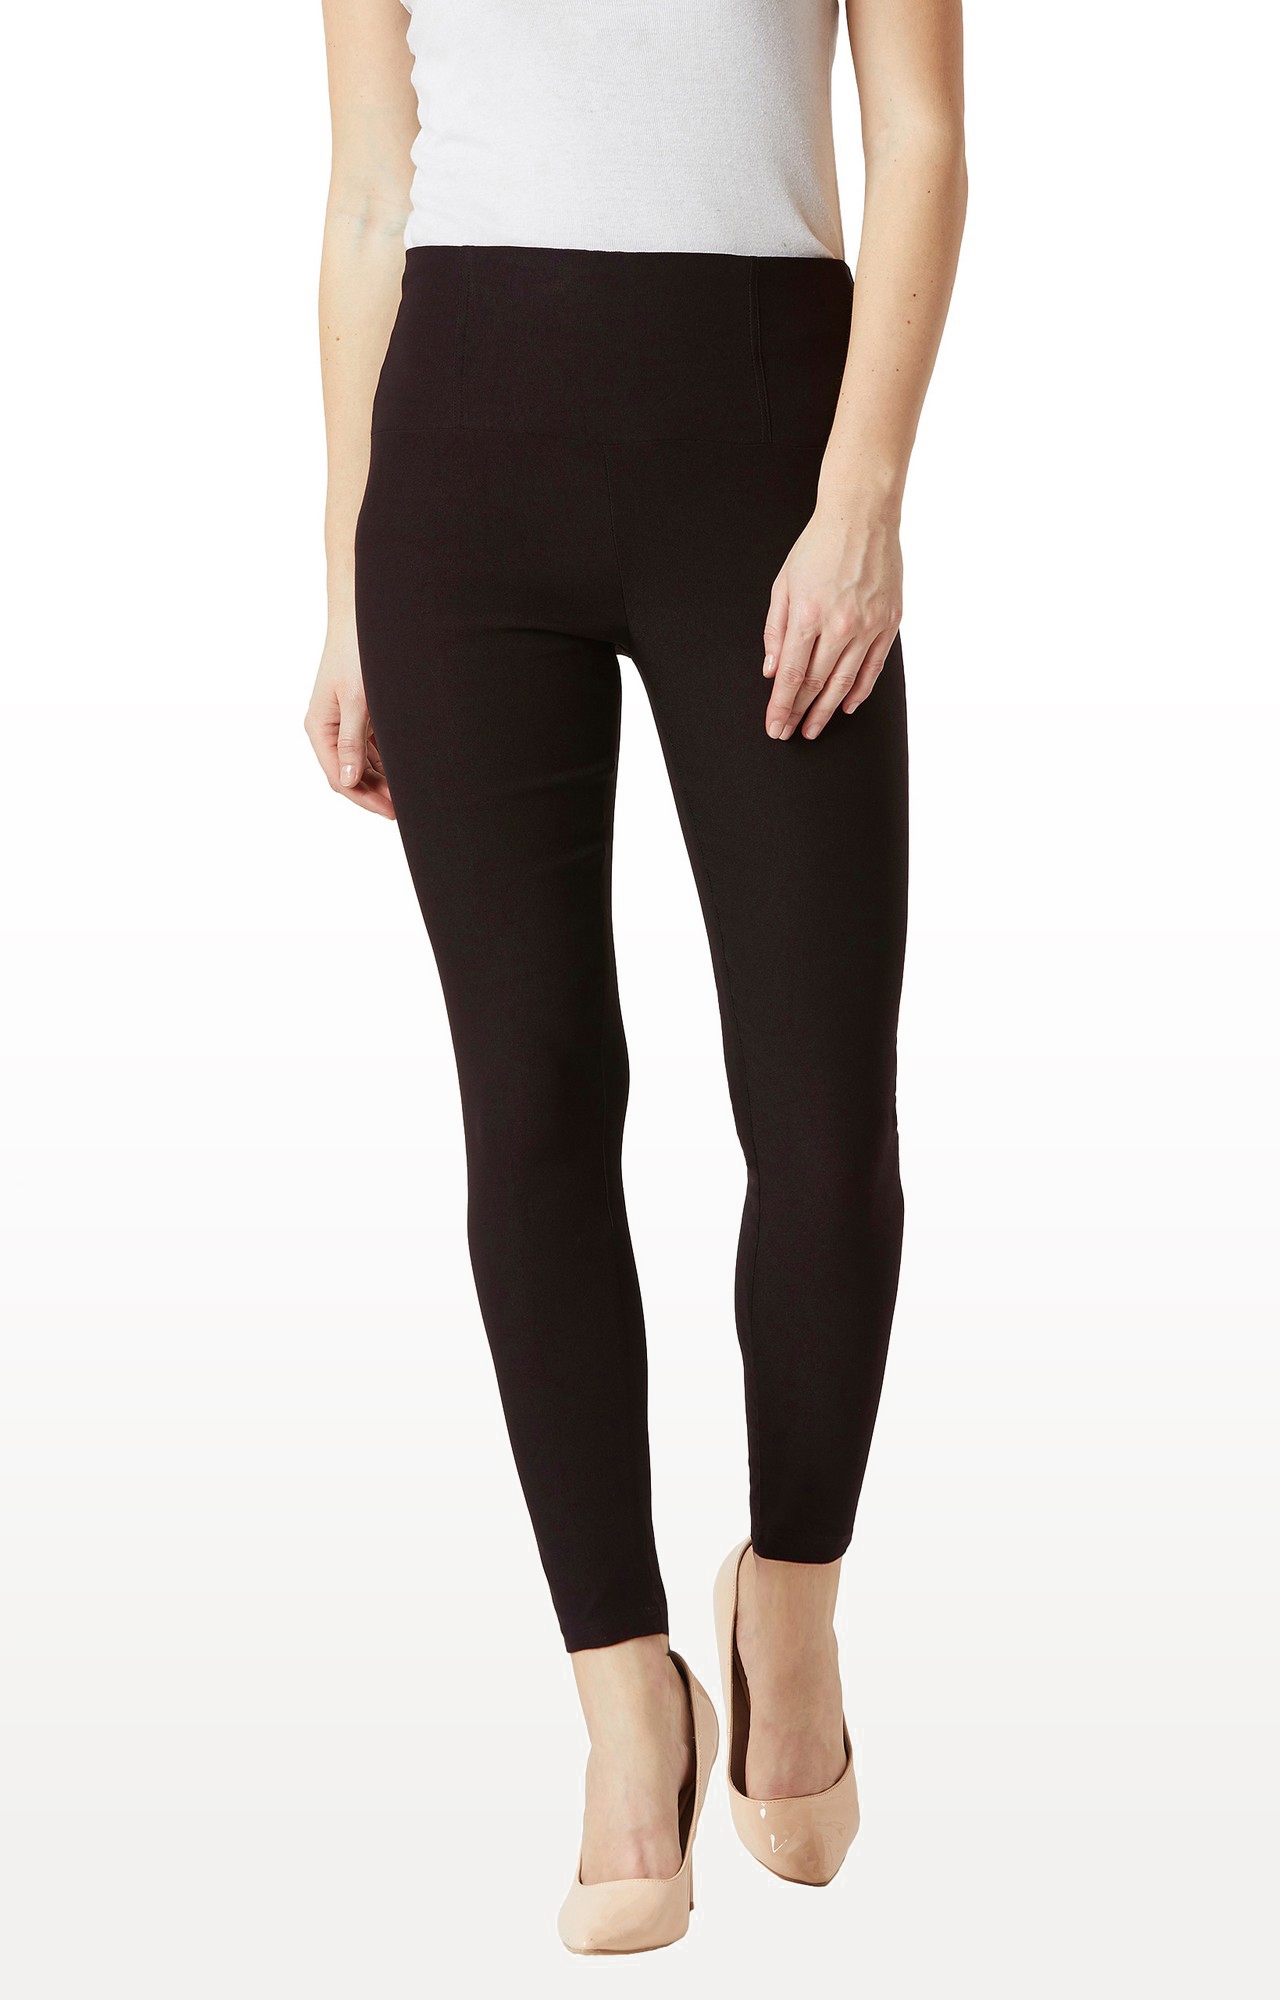 MISS CHASE | Women's Black Solid Jeggings 0